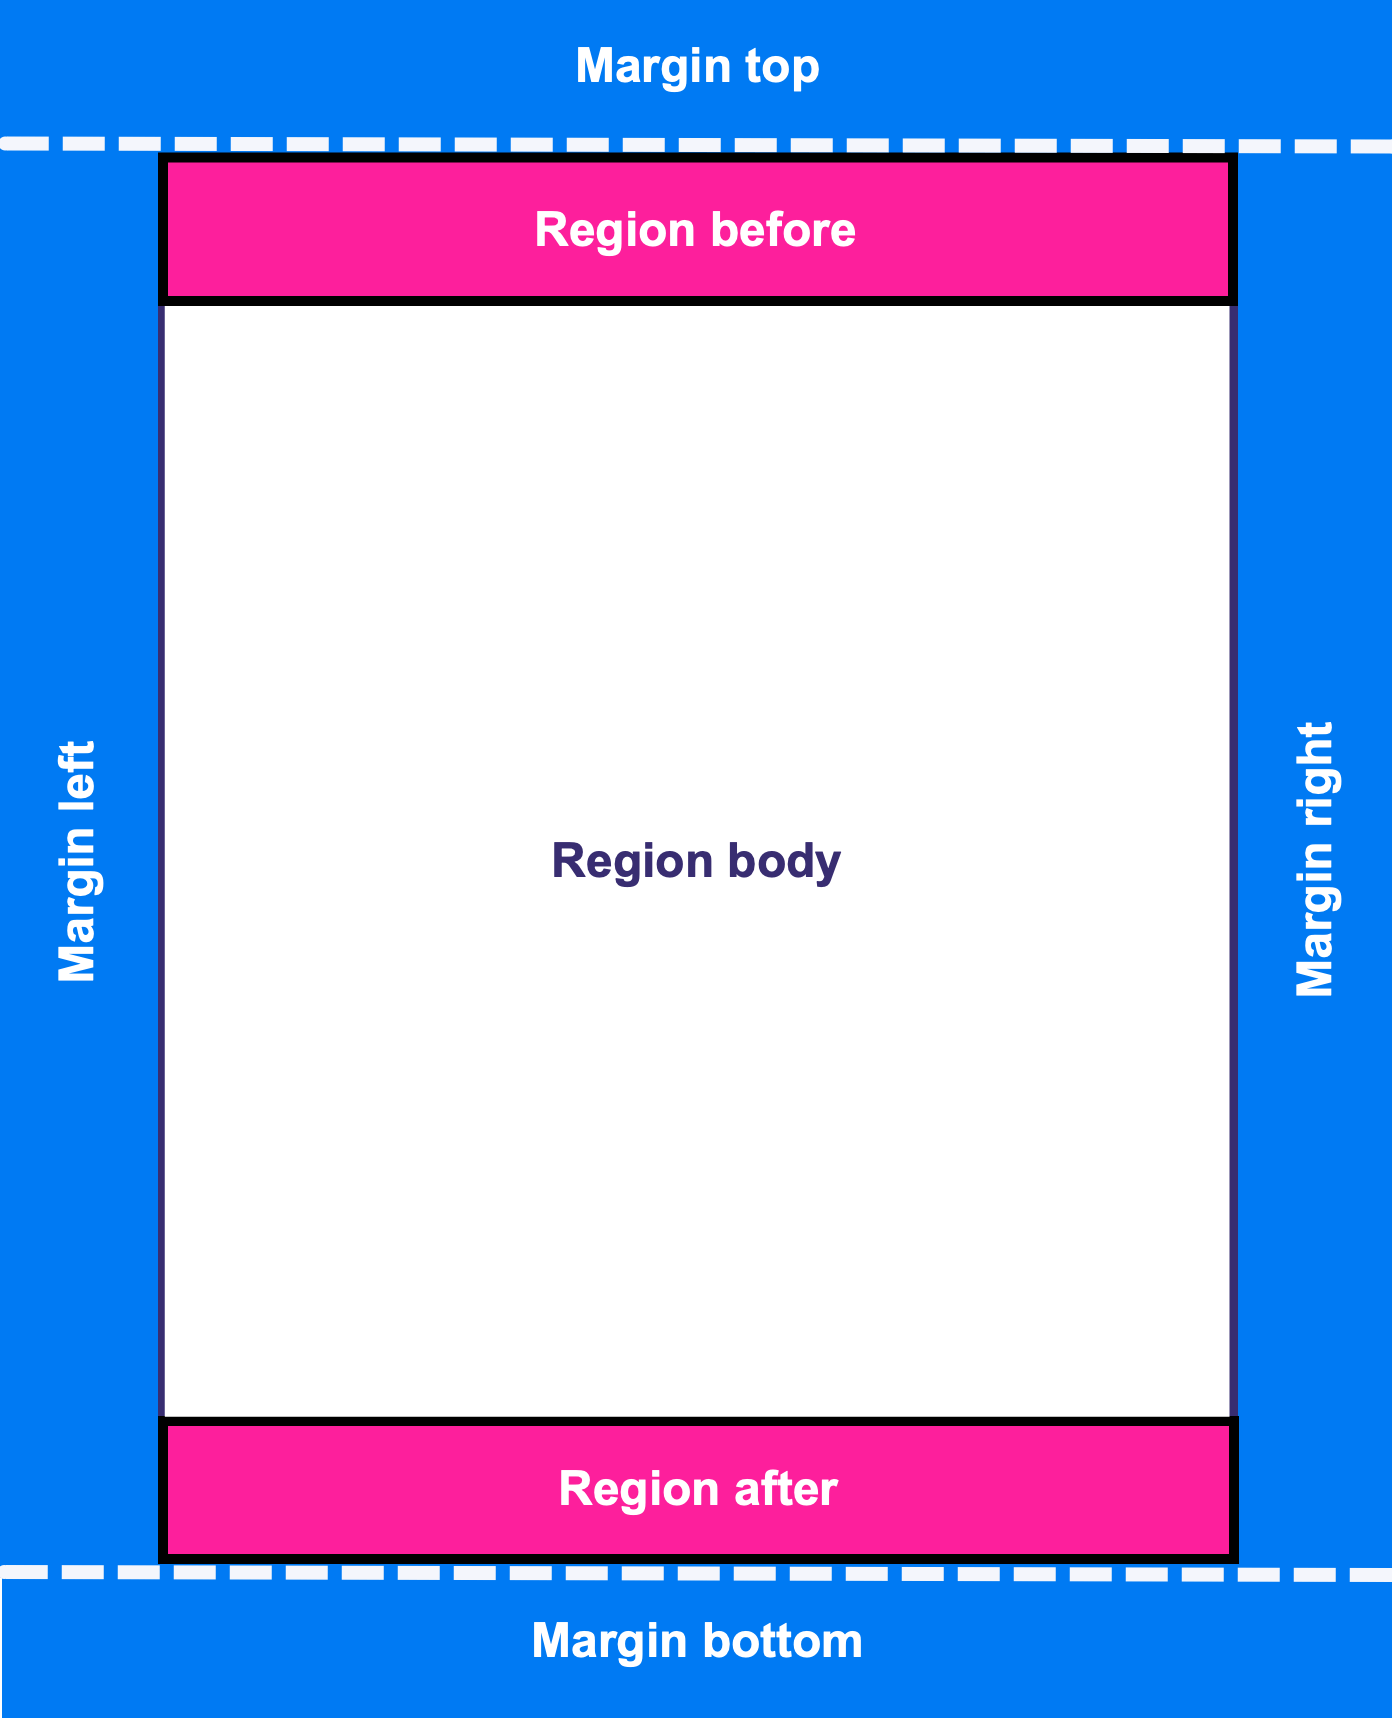 A page divided into sections. The outer section is for margins. Inside that, there is a section for the content of a page. This section has region before area for the header and a region after area for the footer.